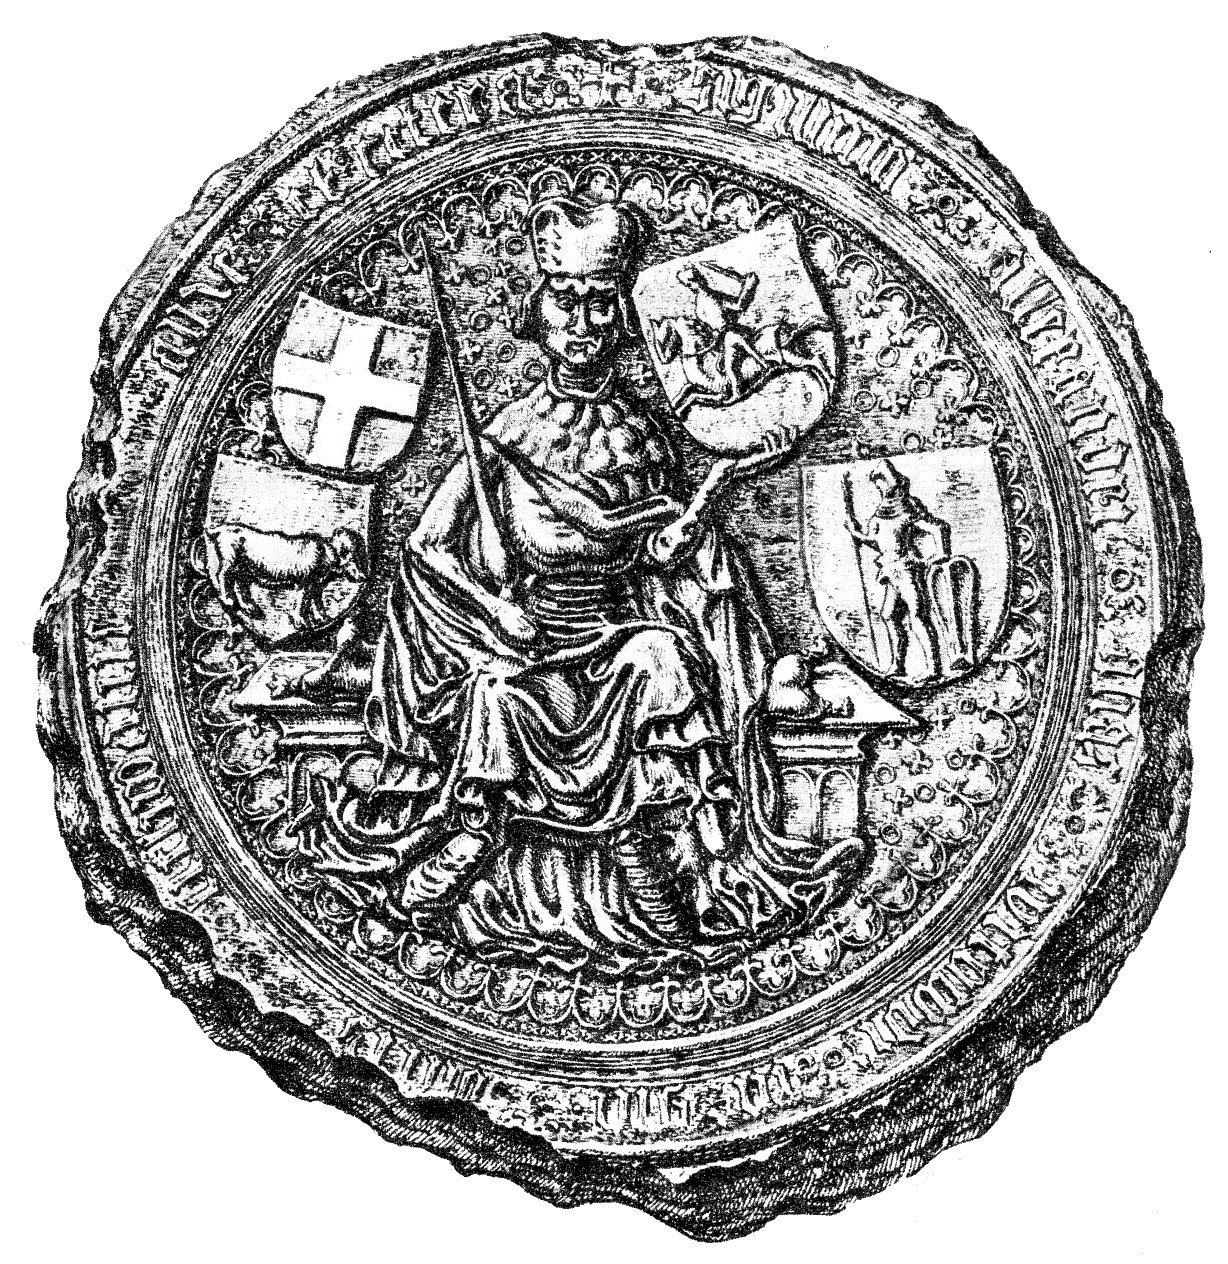 seal_of_vytautas_the_great_wiki.jpg